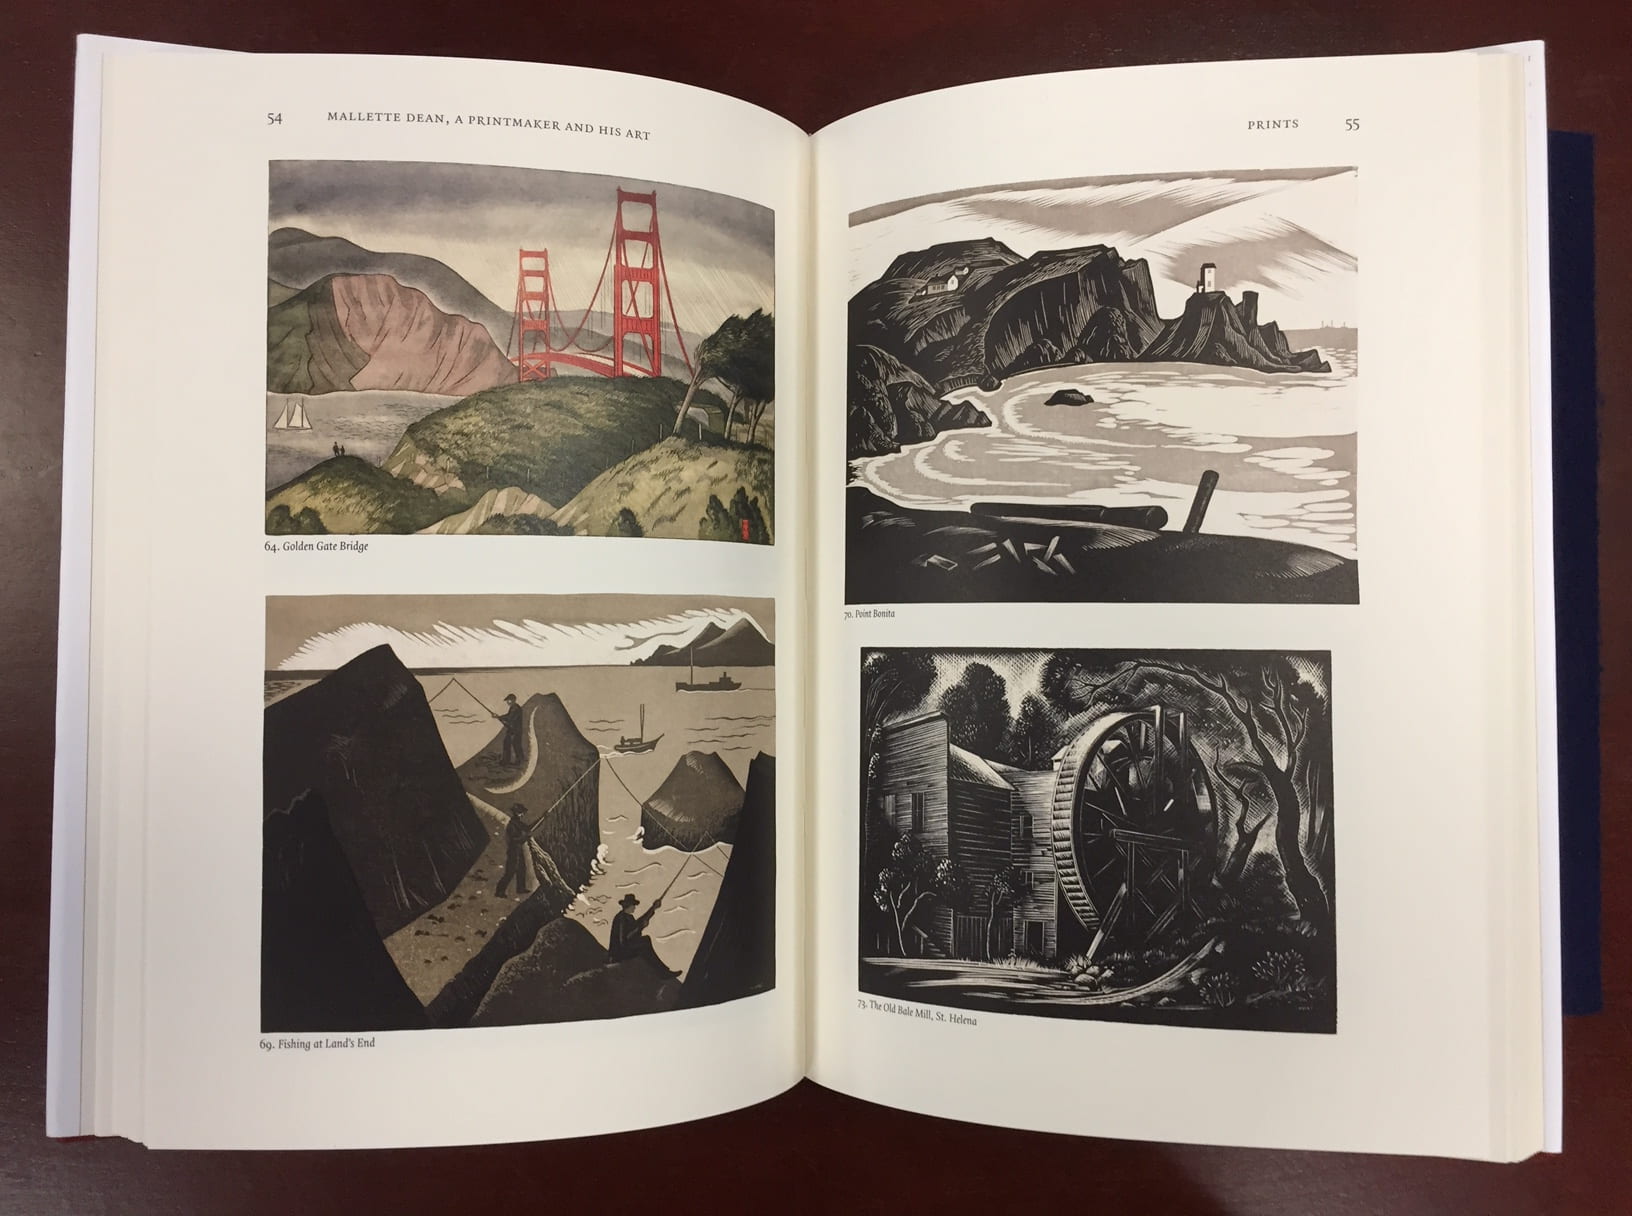 open pages of John Hawk's book featuring Mallette Dean's prints of California coast and the Golden Gate Bridge